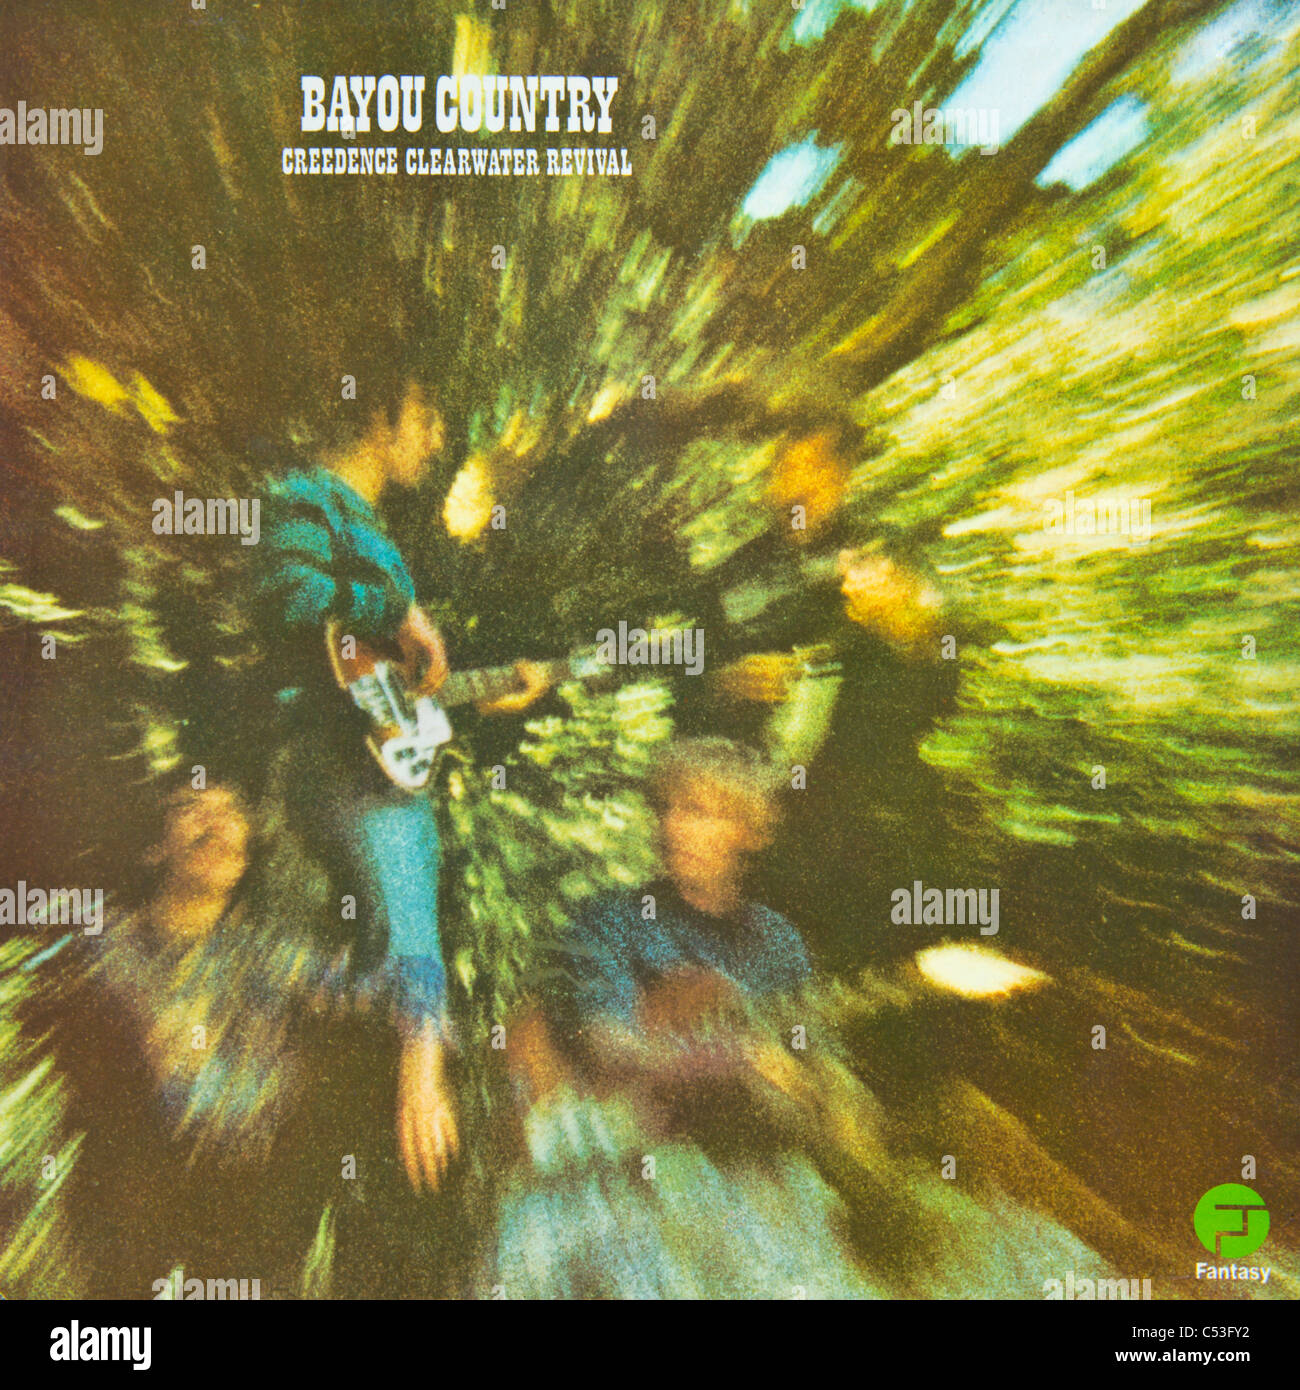 Cover of original vinyl album Bayou Country by Creedence Clearwater Revival released 1969 on Fantasy Records Stock Photo